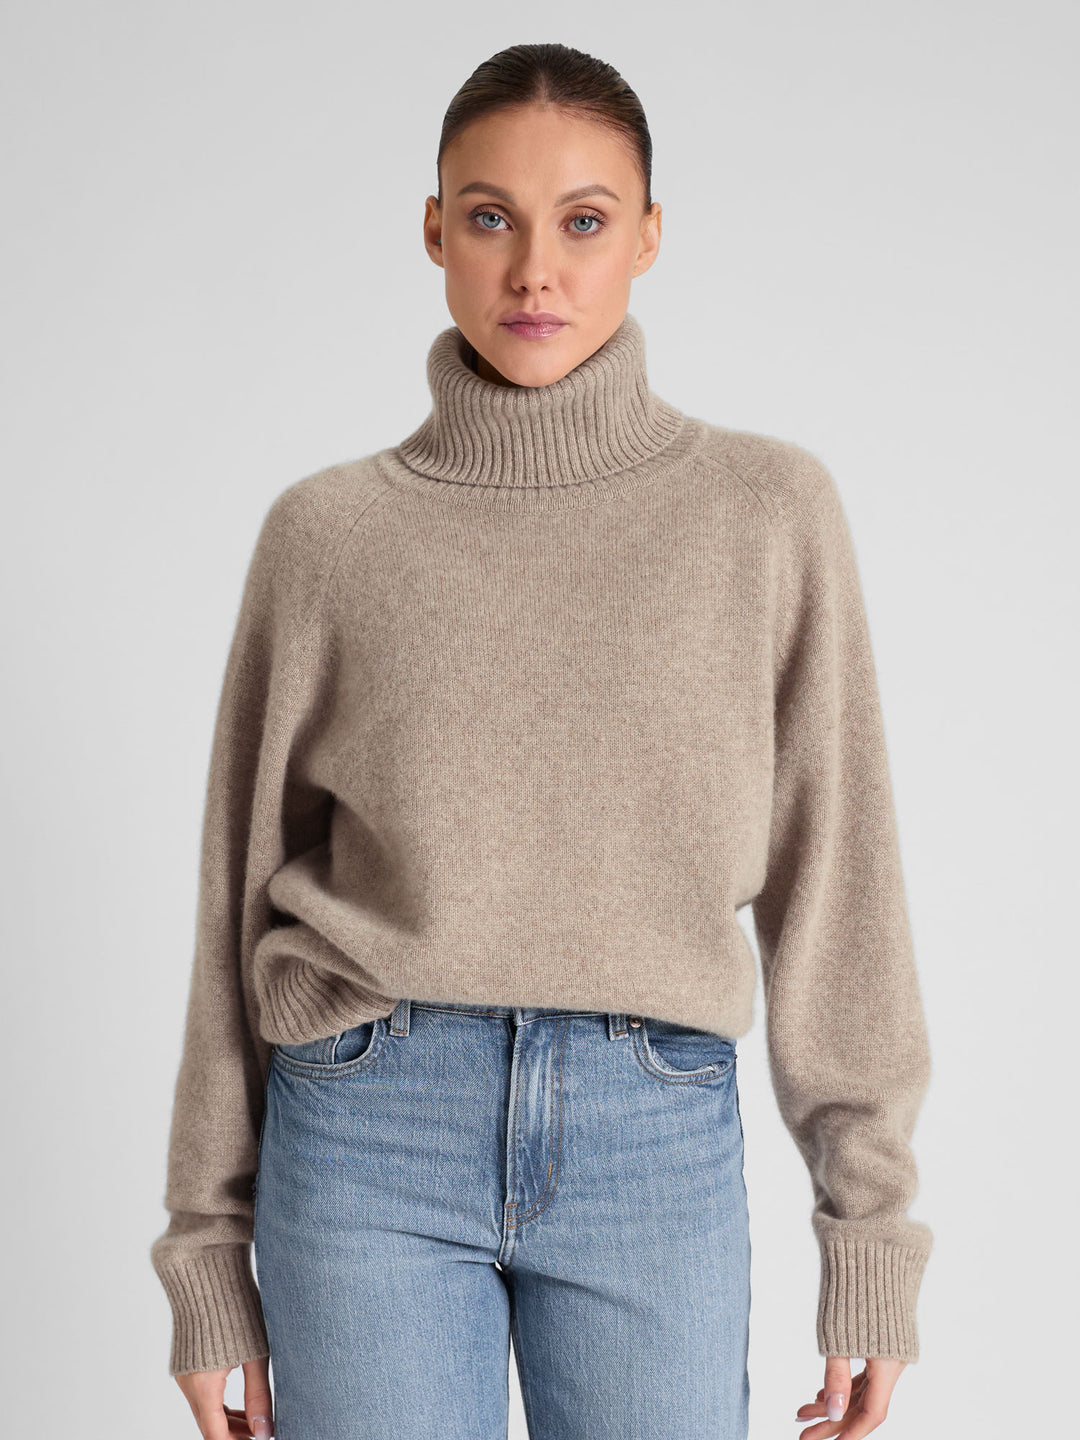 Cashmere sweater "Milano" in 100% pure cashmere. Scandinavian design by Kashmina. Color: Toast.